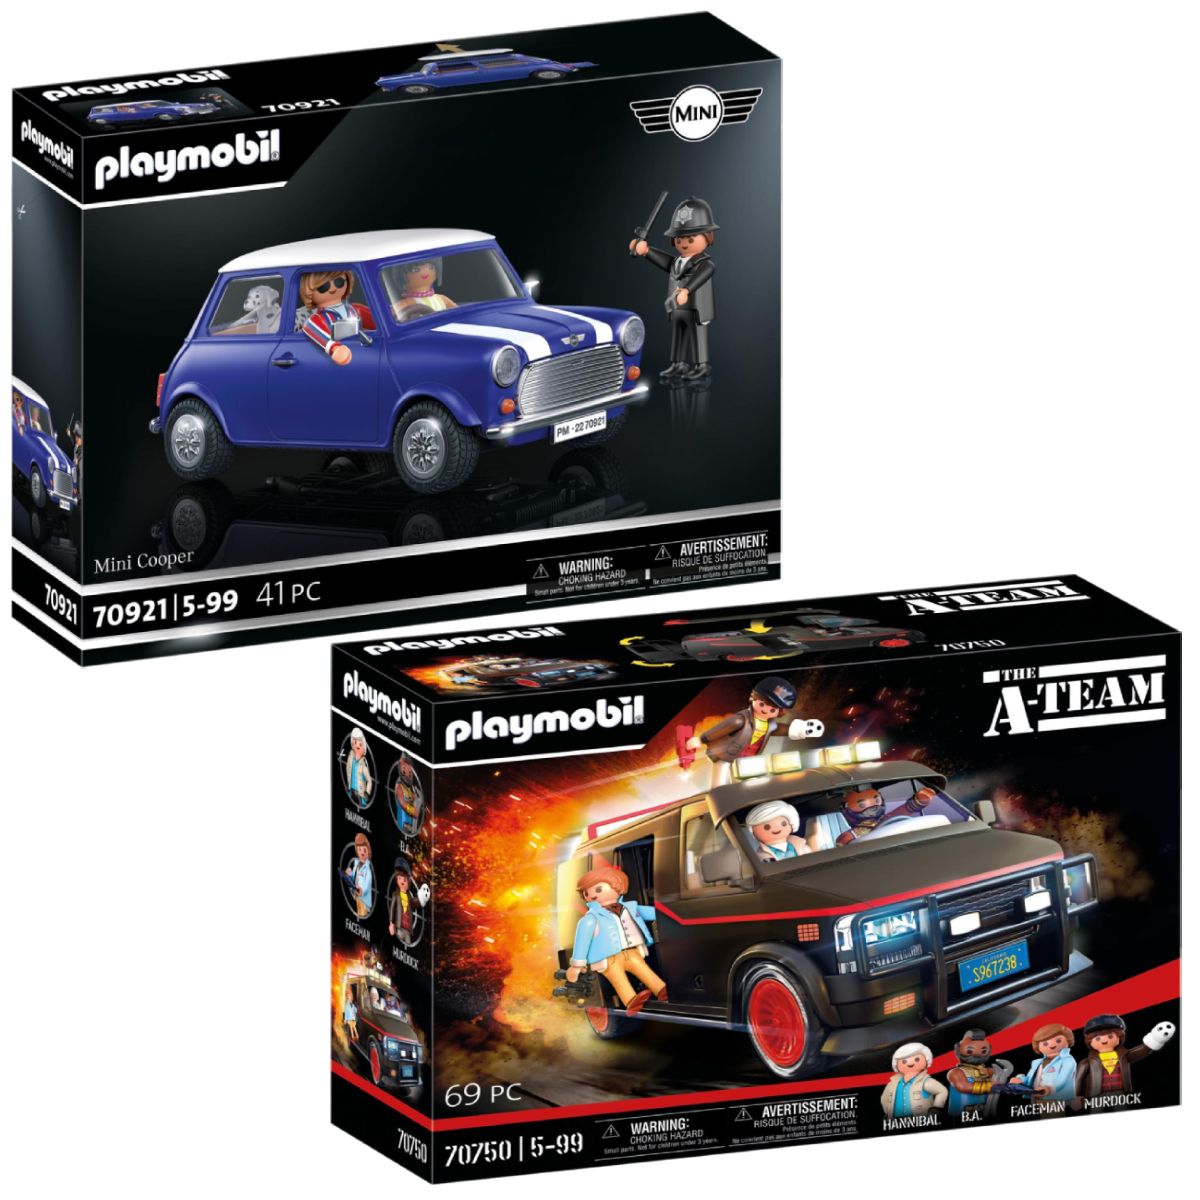 PLAYMOBIL Pack Exclu Web Mini Cooper + Fourgon Agence tous risques pas cher  